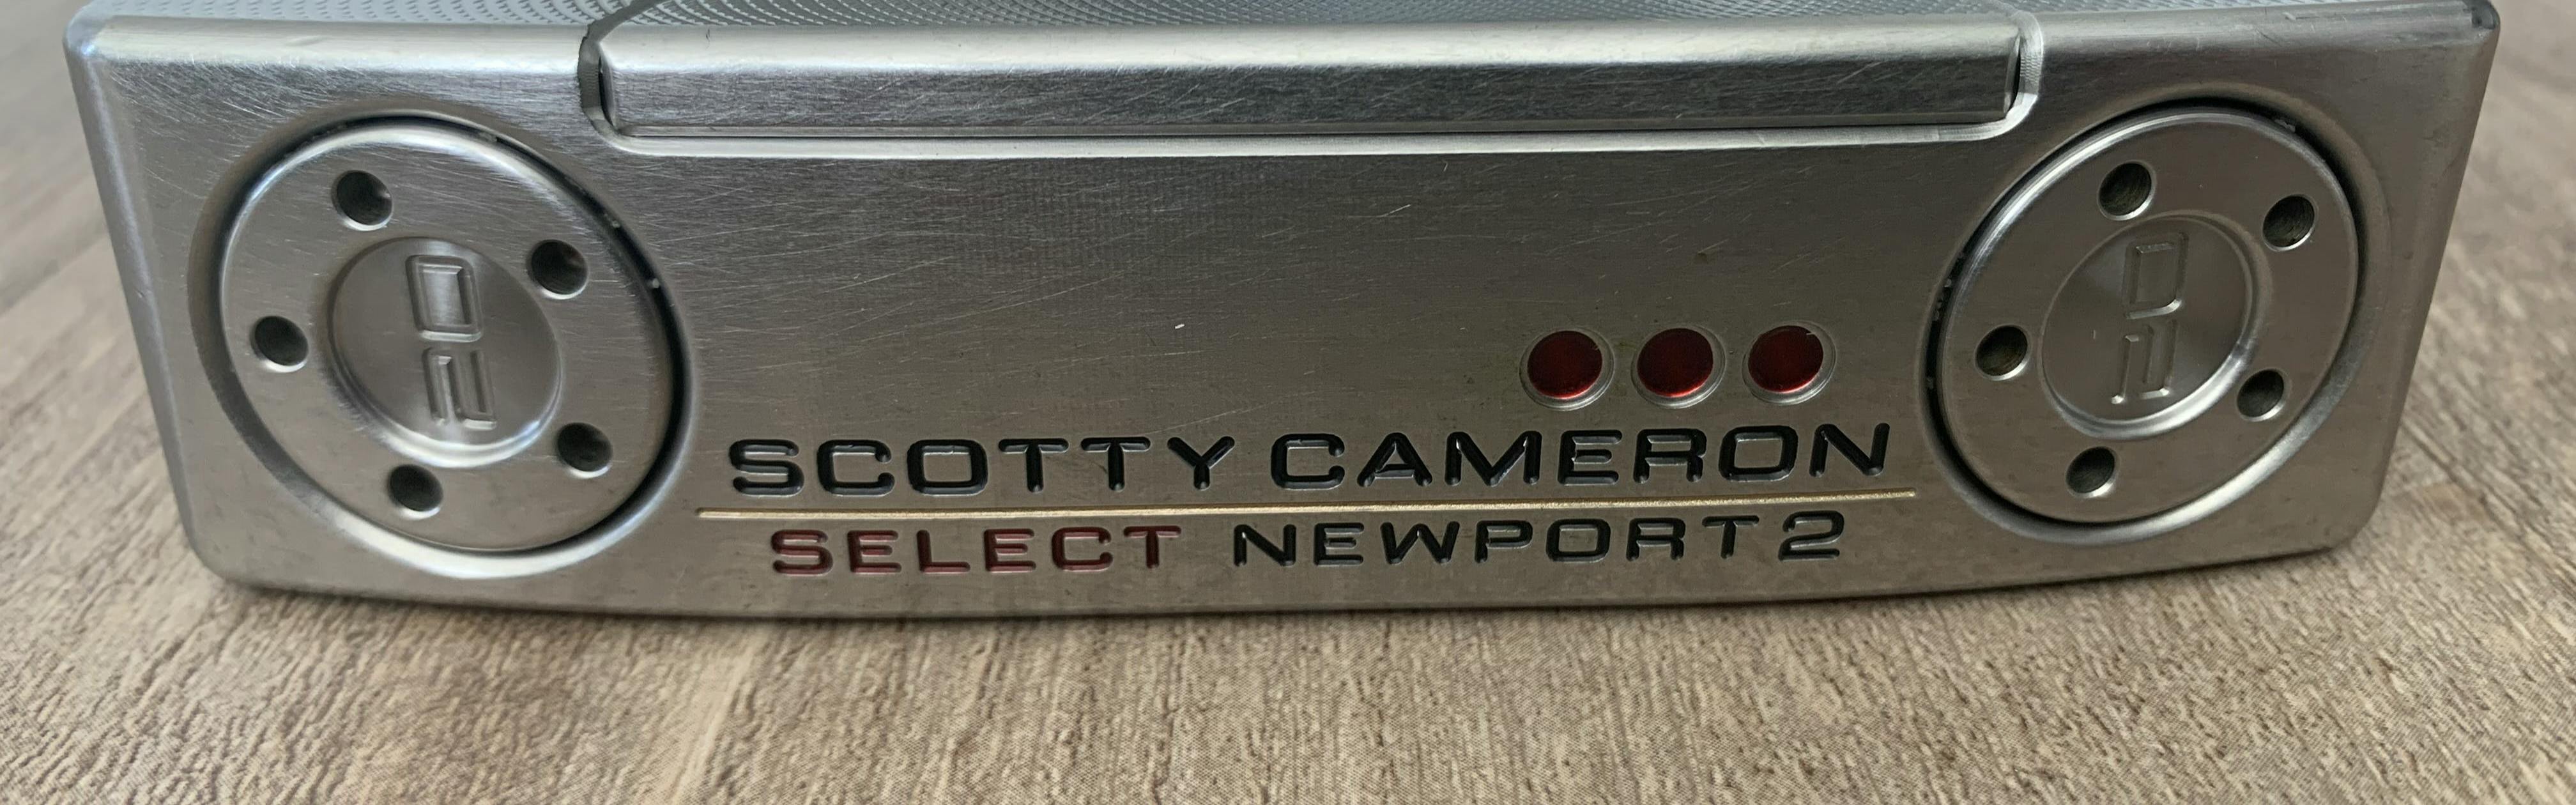 Bottom of the Scotty Cameron Special Select Newport 2 Putter.